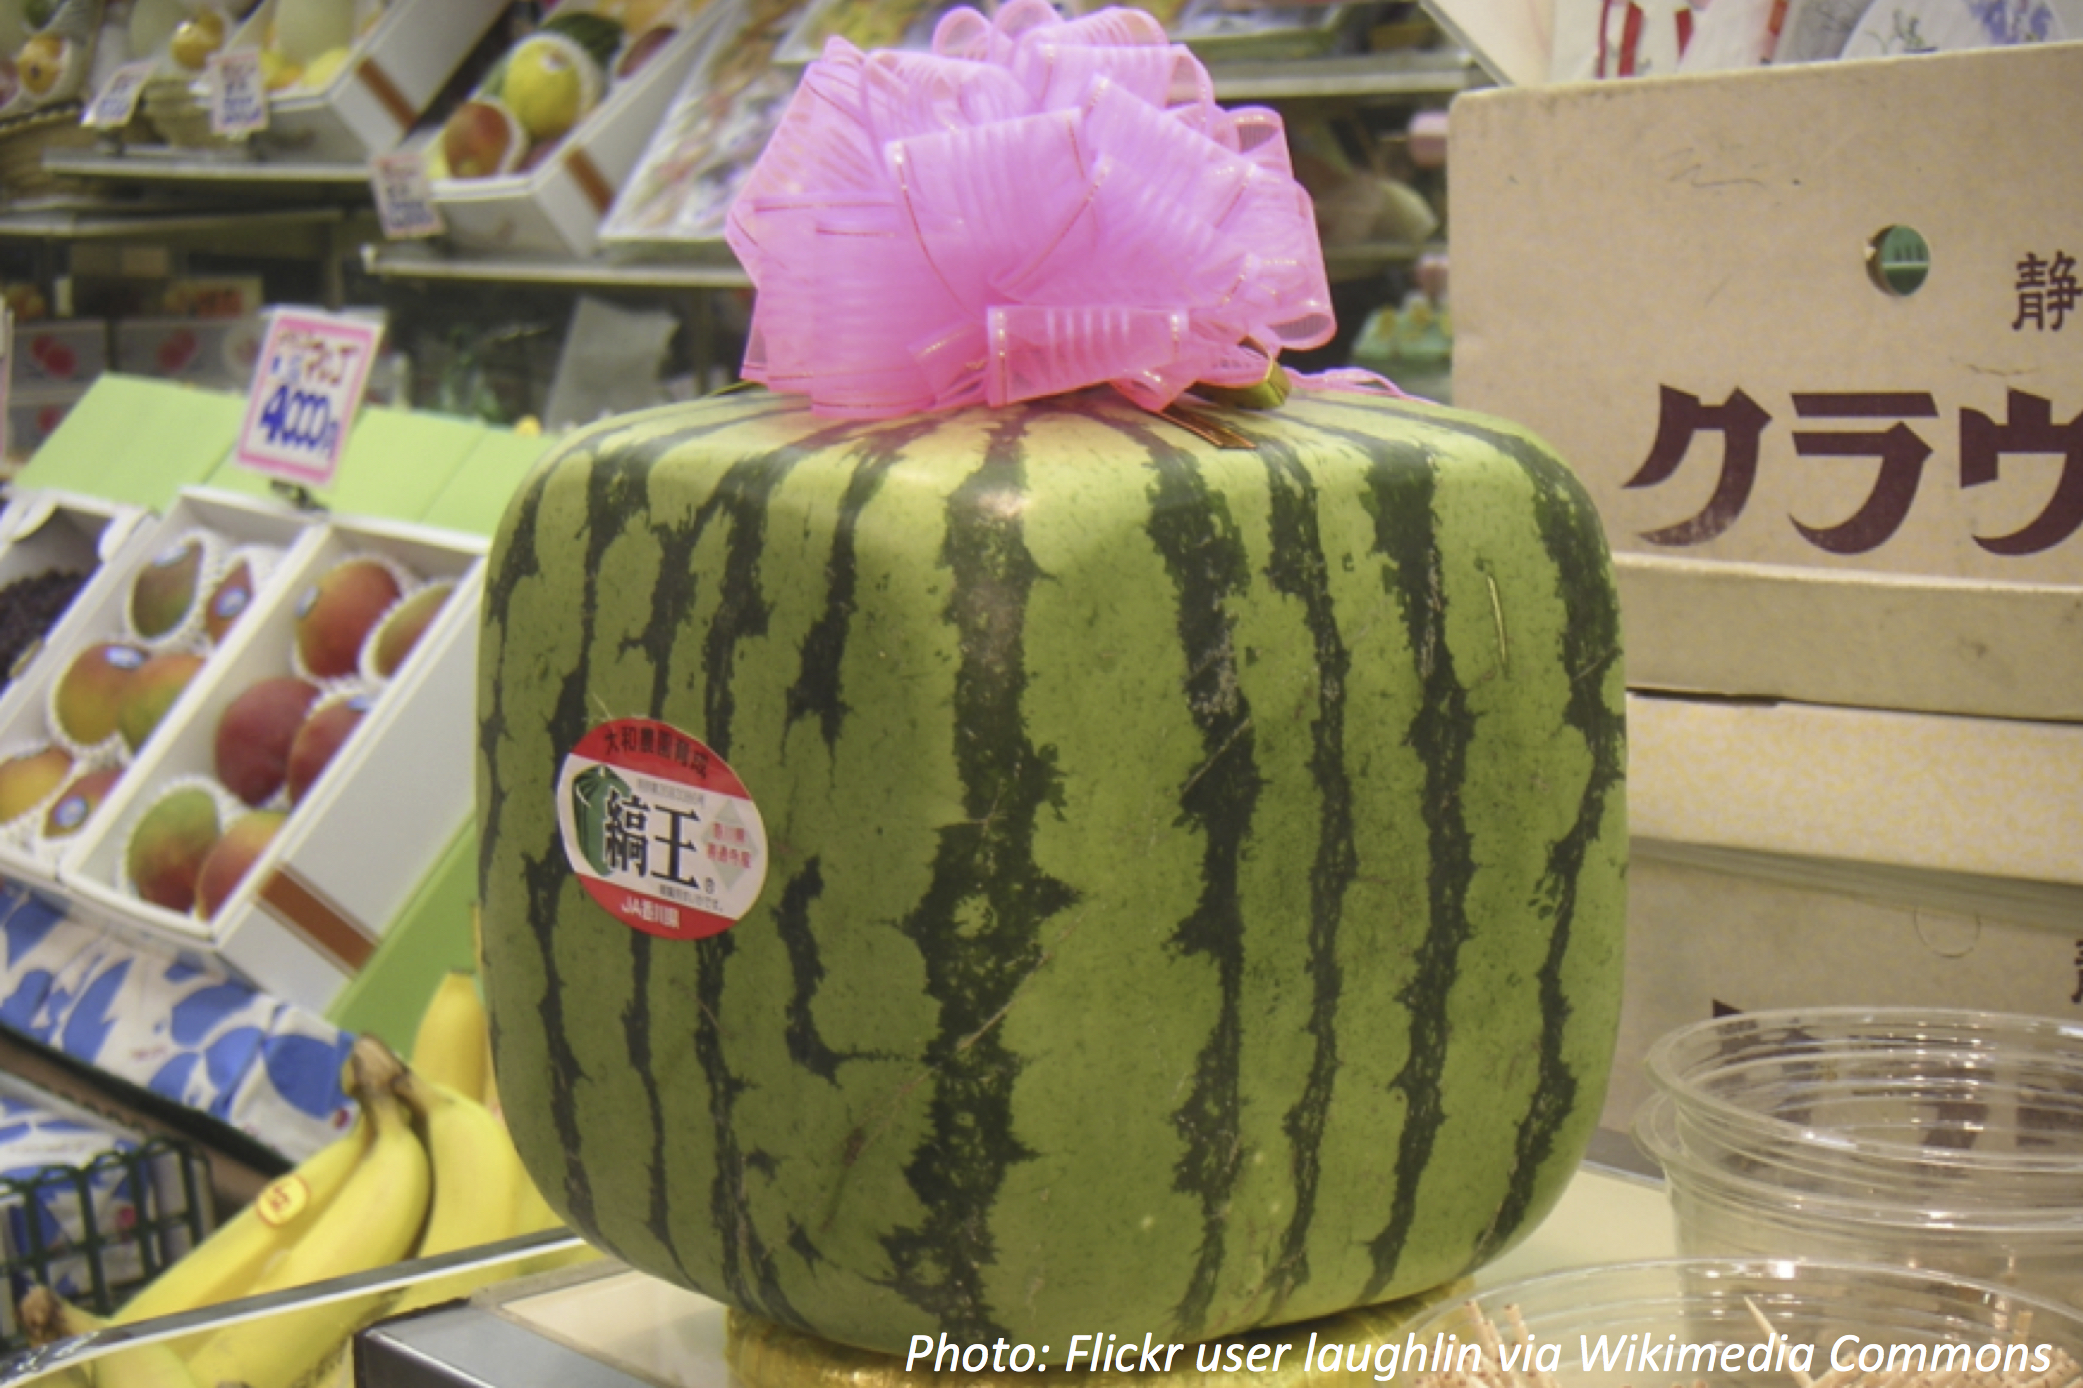 The Wild Side of Watermelon